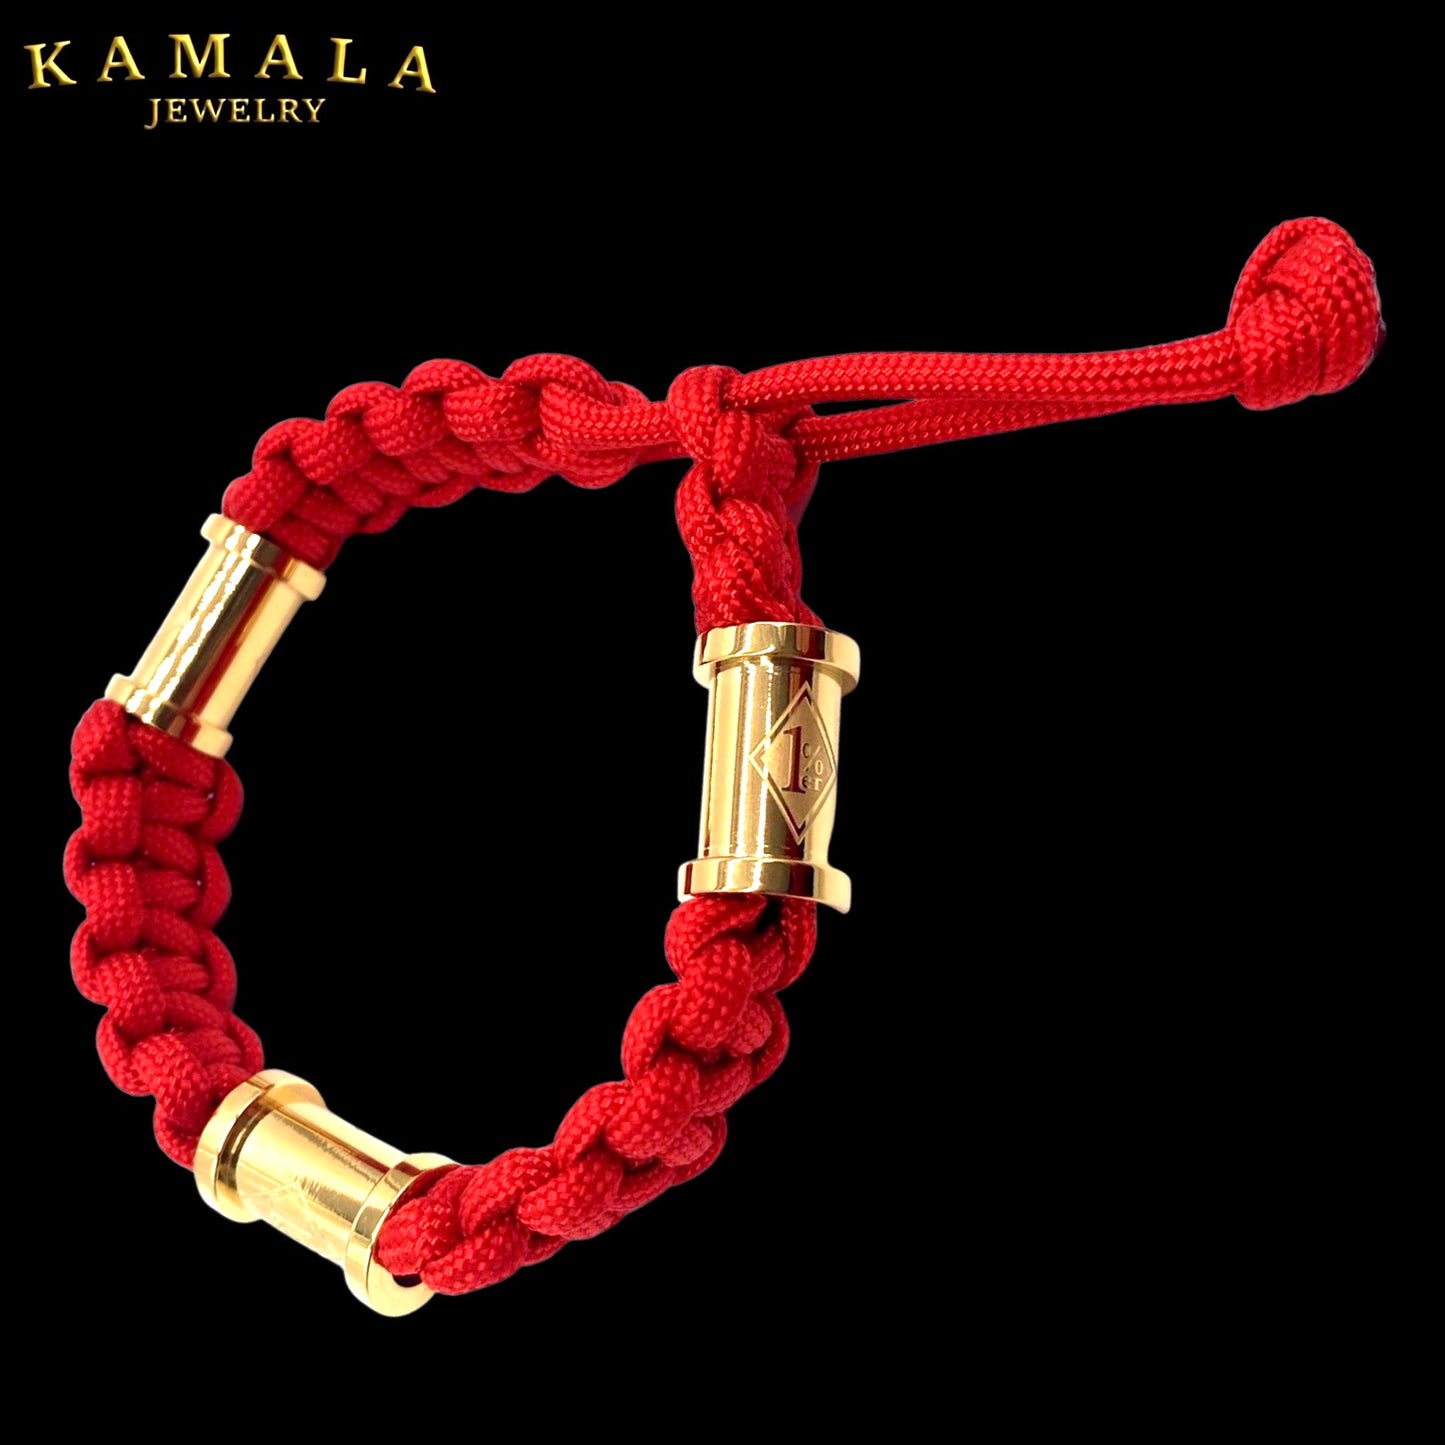 Madmax Armband - Rot mit 1%er Perlen in Gold